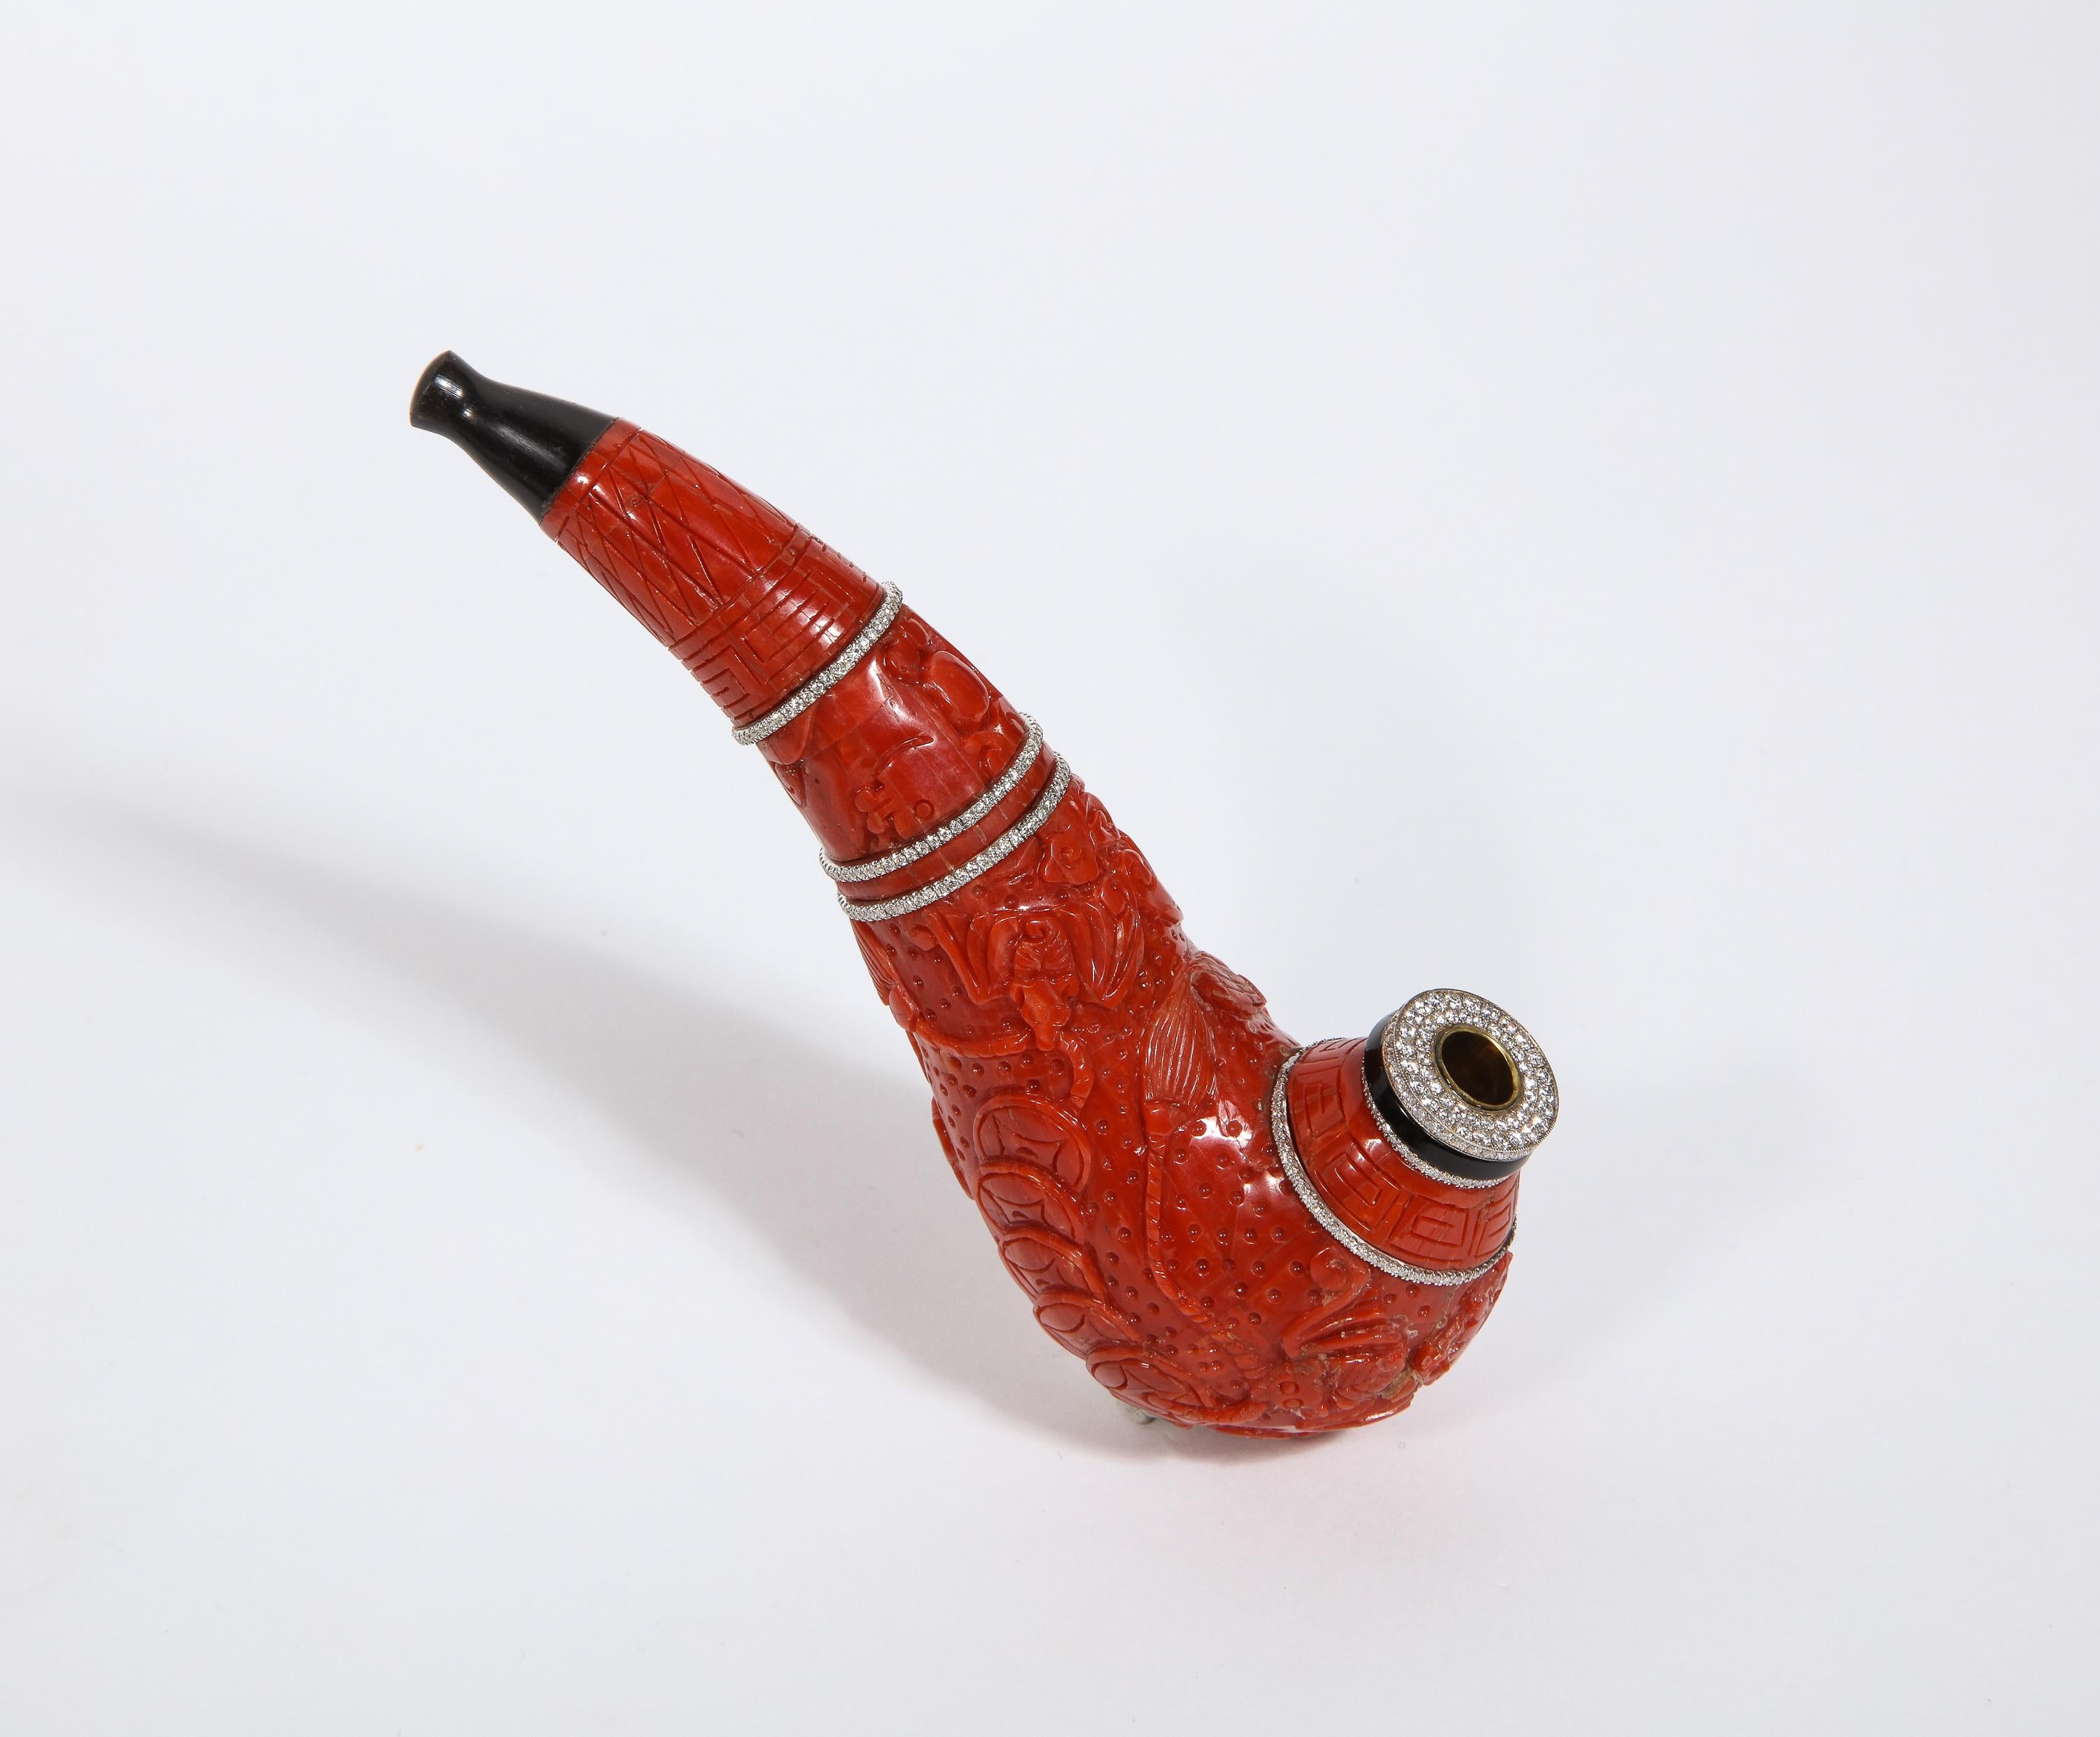 A contemporary coral, 18K gold, diamonds, and onyx pipe.

The carved coral pipe engraved with Chinese ornaments enhanced with brilliant-cut pave diamonds and onyx terminal, with an ebony mouth piece.

For a nearly identical piece, see Christies